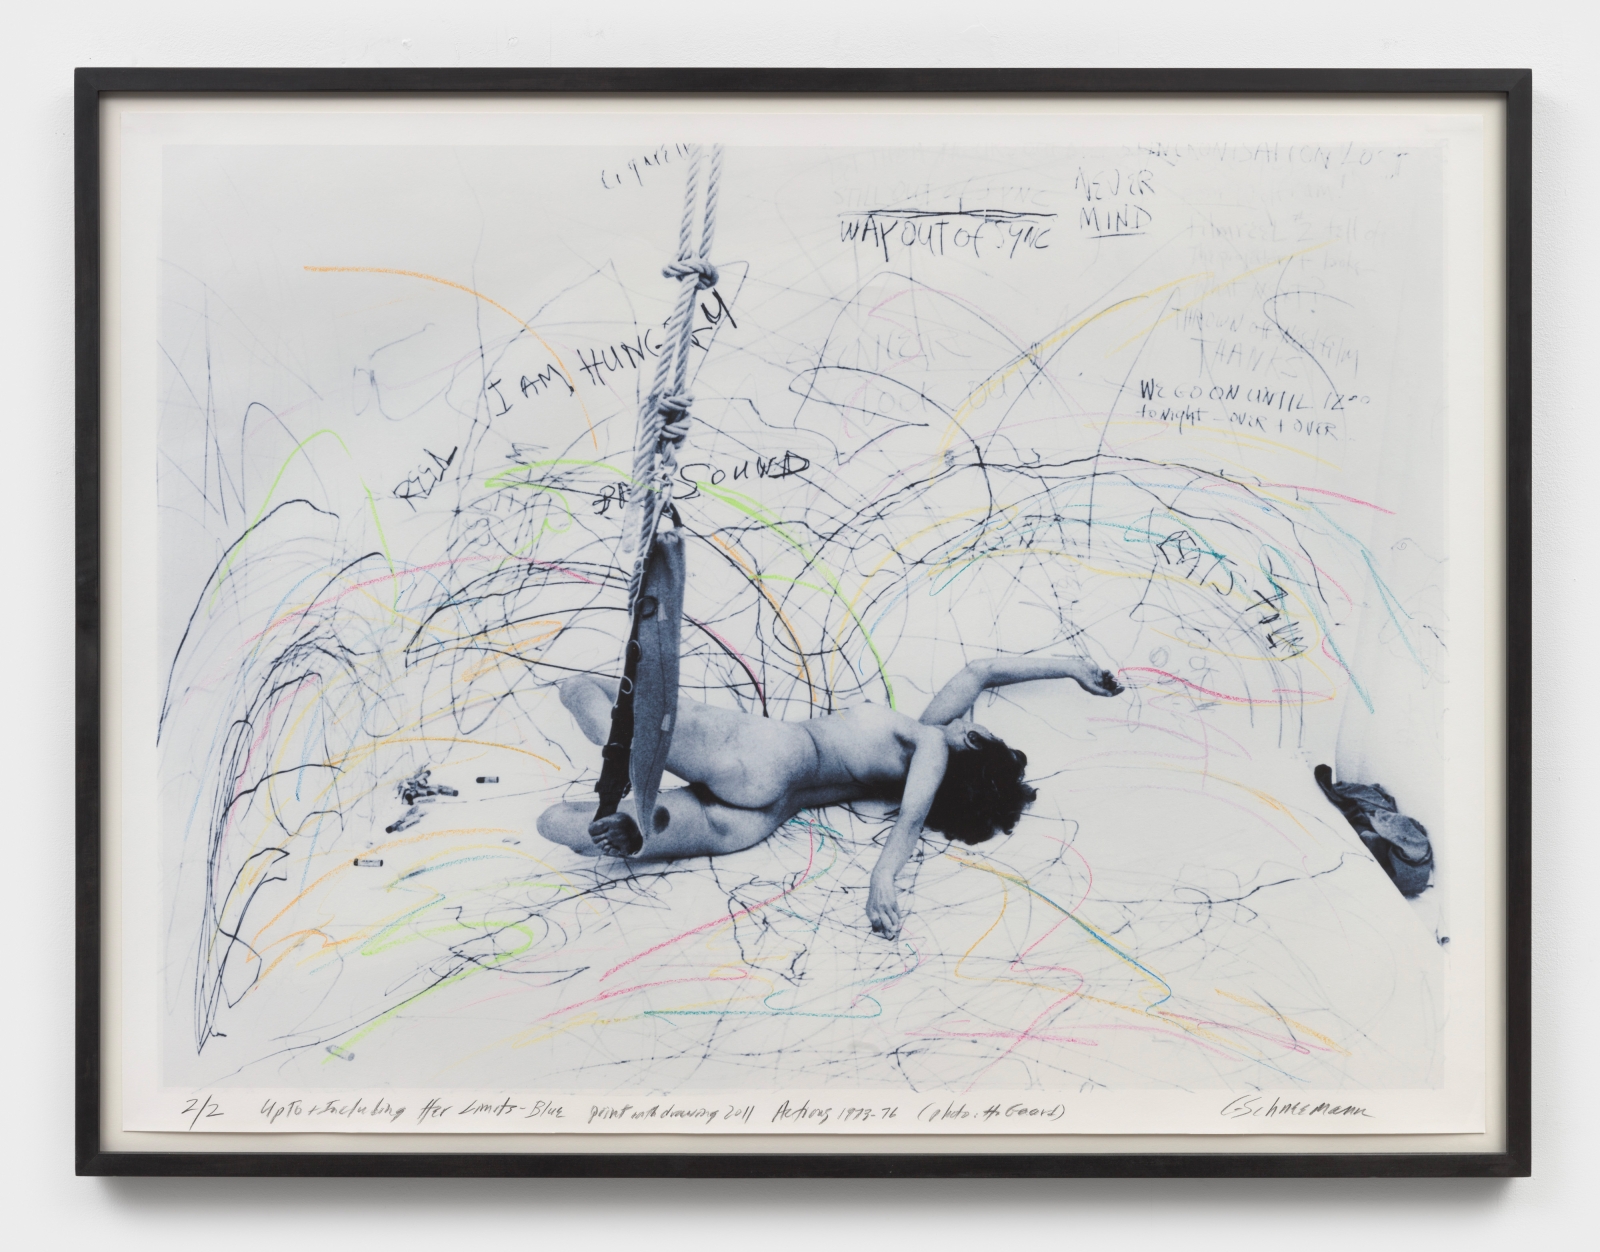 Carolee Schneemann
Up to and Including Her Limits-Blue, 1973-76/2011
giclee print with hand drawing
39 1/2 x 52 ins.
100.3 x 132.1 cm